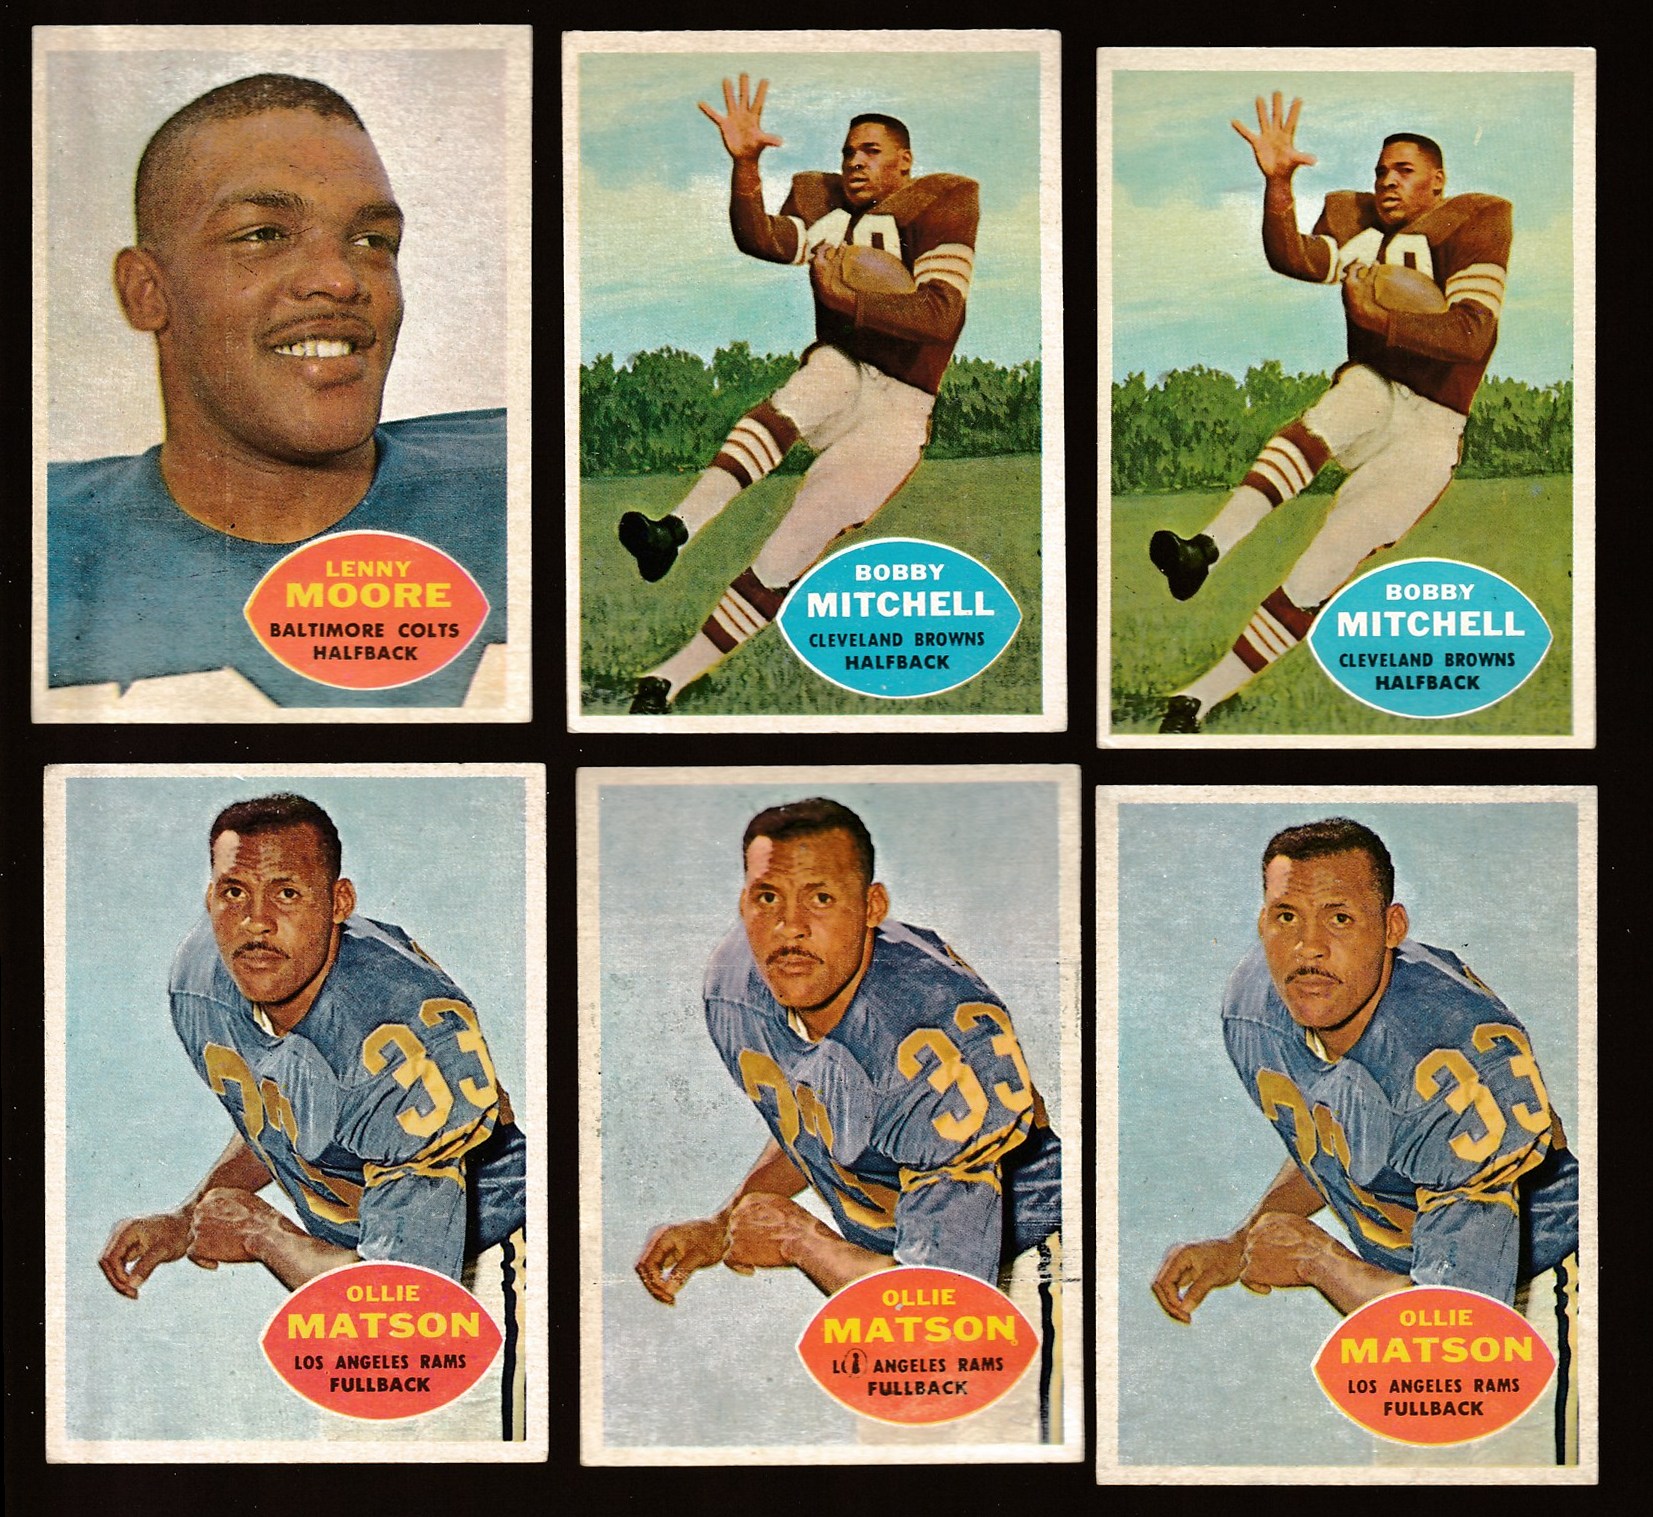 1960 Topps FB #  3 Lenny Moore [#] (Colts) Football cards value